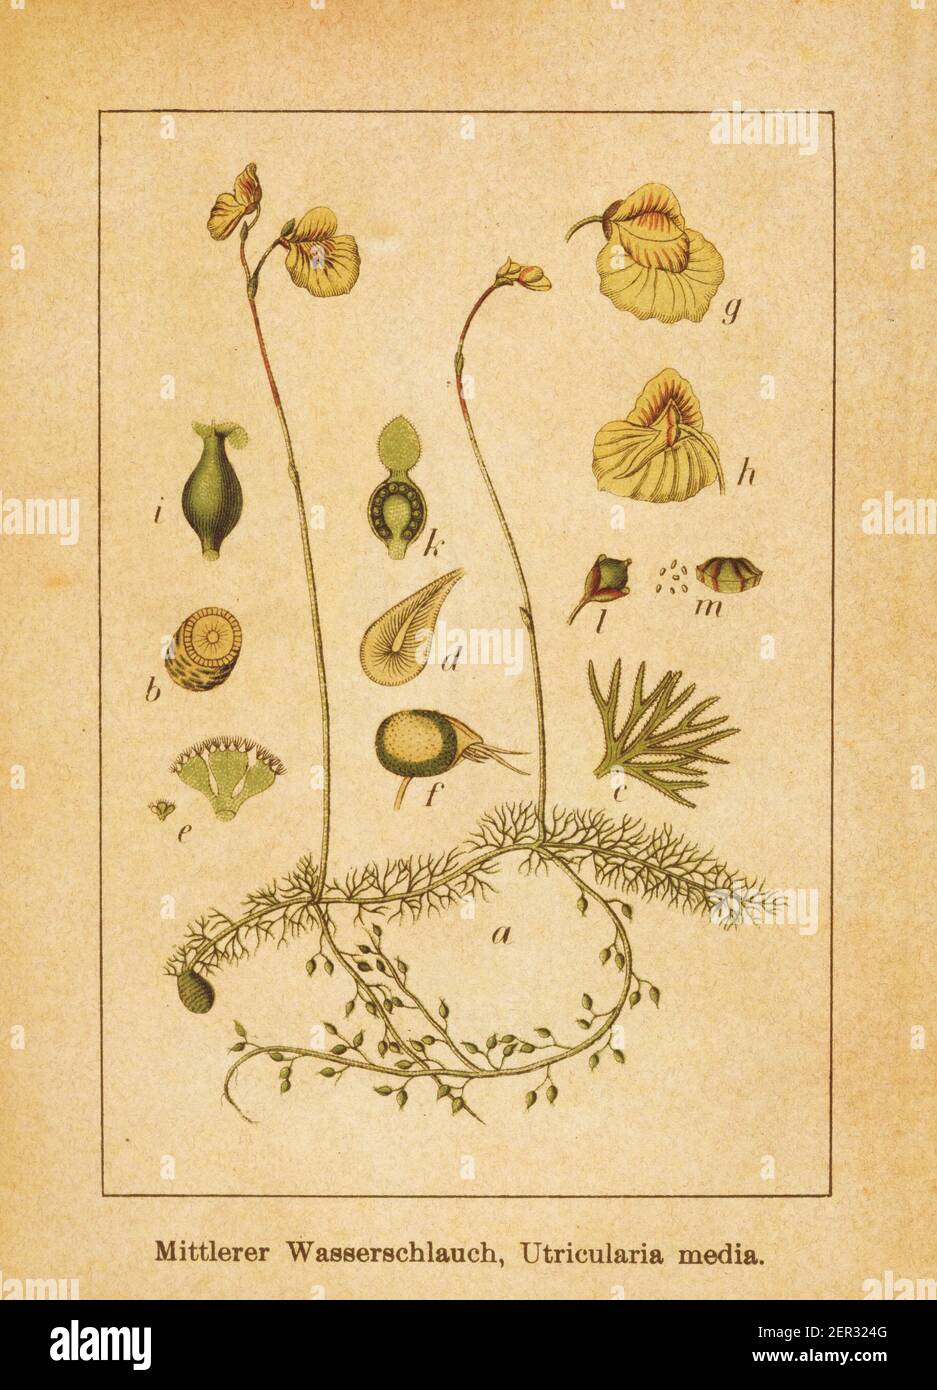 Antique illustration of an utricularia media, also known as utricularia intermedia or flatleaf bladderwort. Engraved by Jacob Sturm (1771-1848) and pu Stock Photo